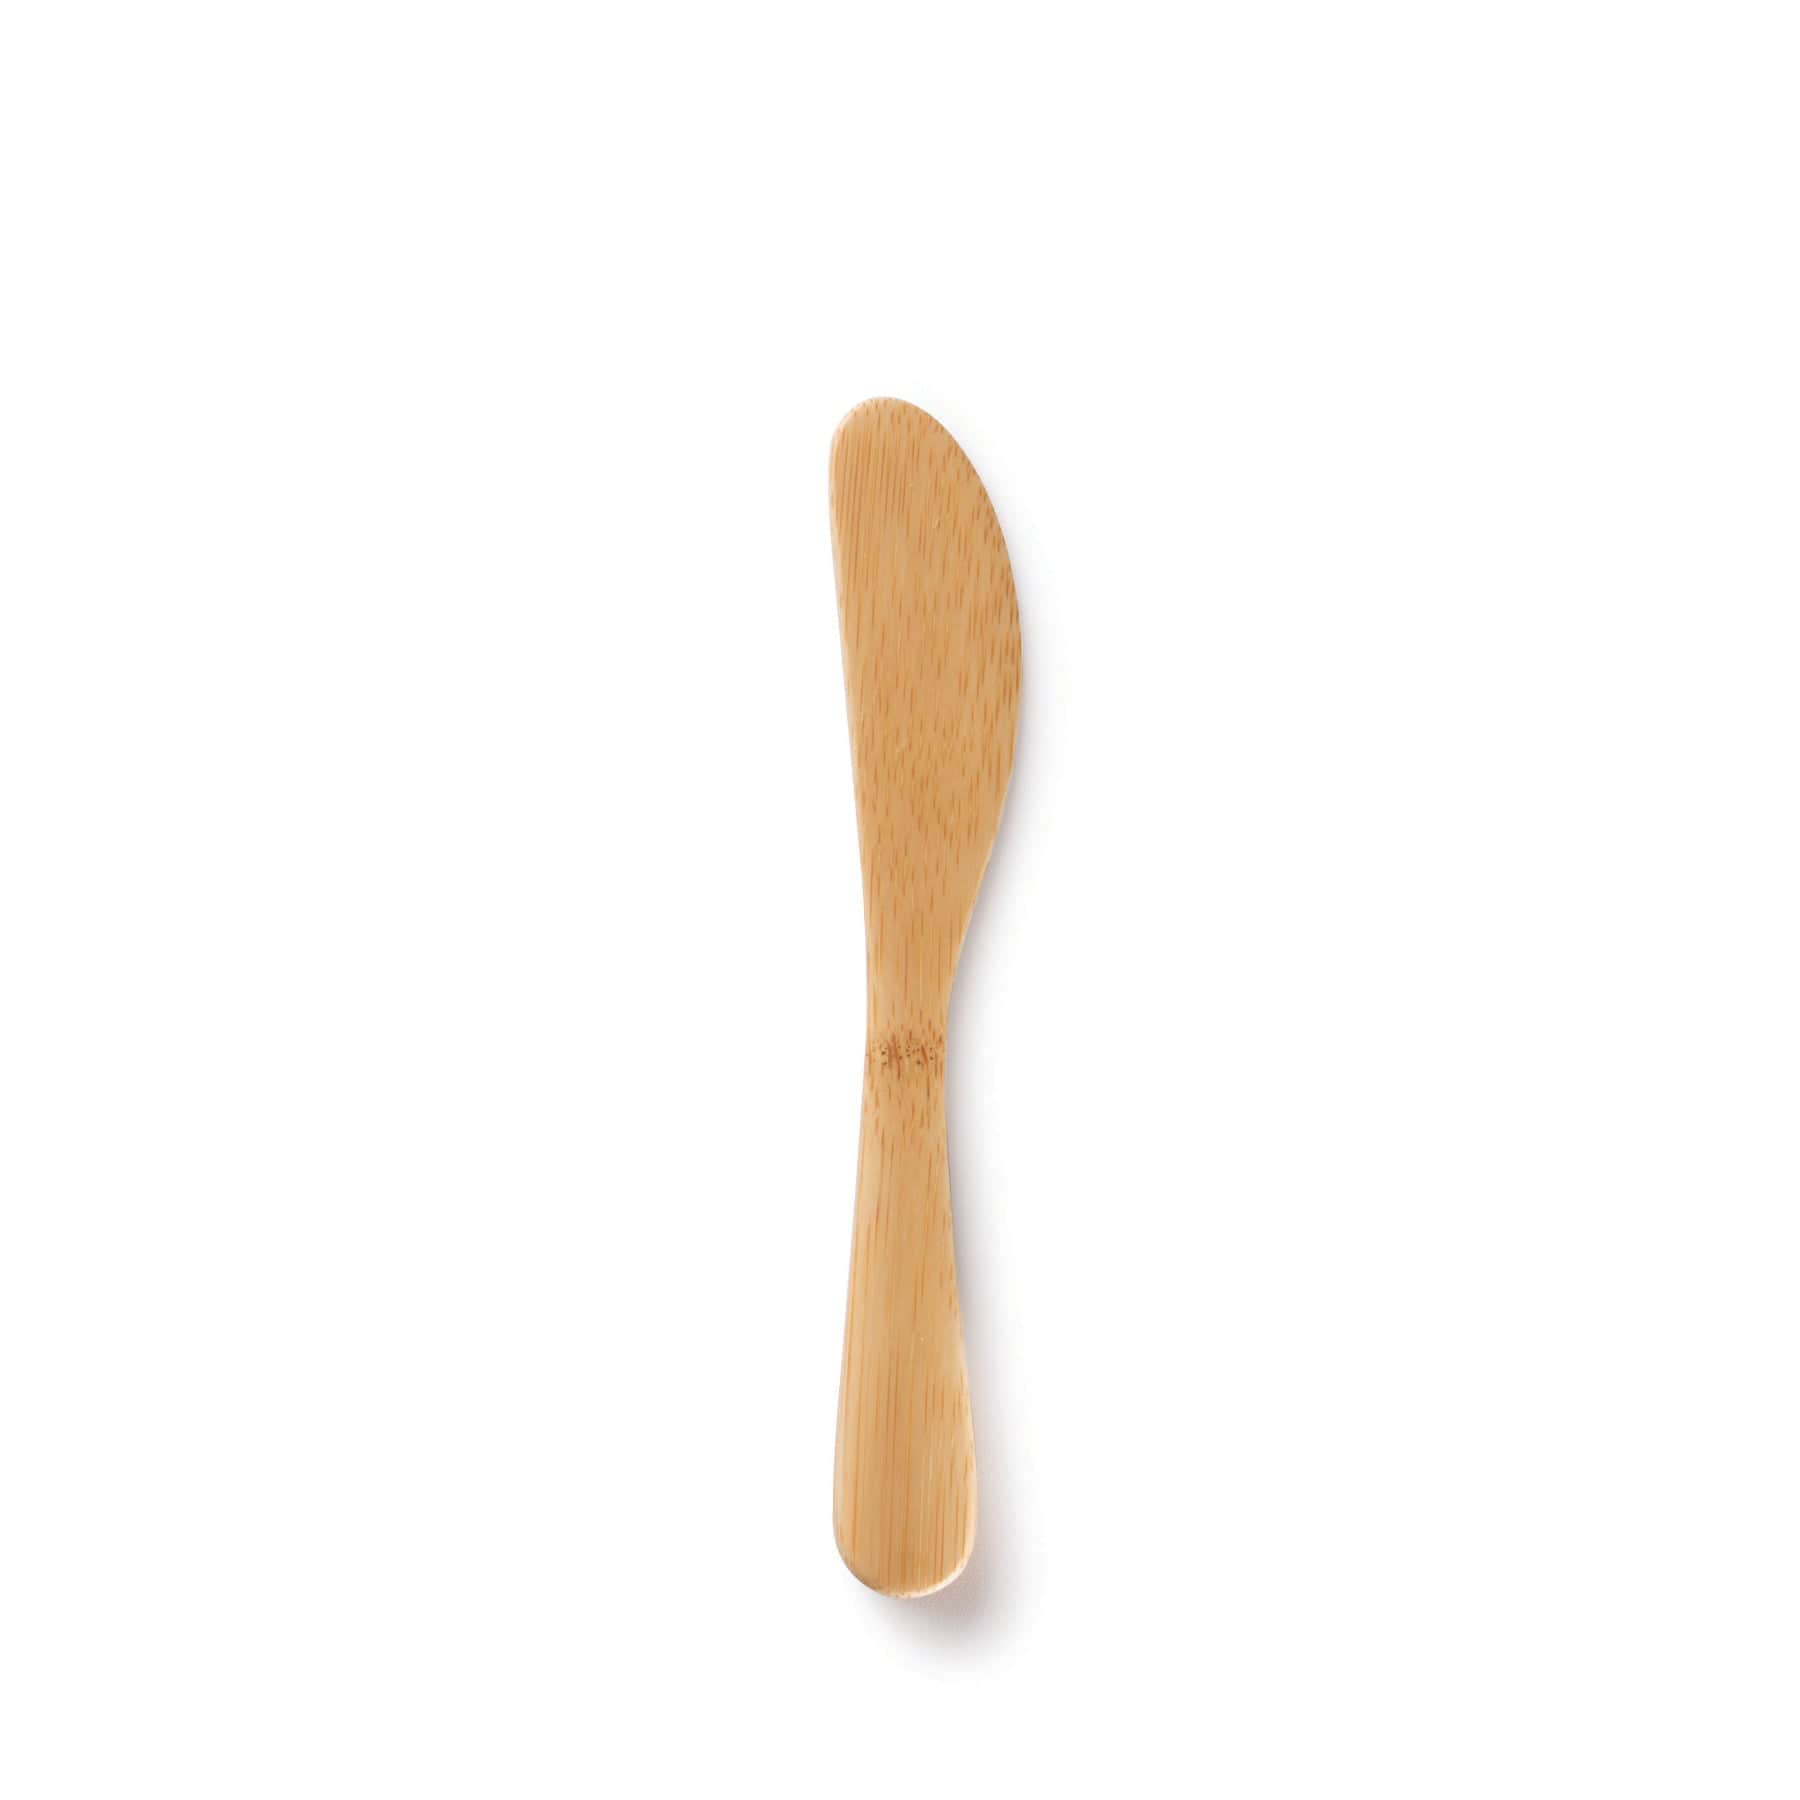 Bamboo spatula isolated on white background, eco-friendly kitchen utensil, wooden spatula top view, natural bamboo cooking tool, single wooden spreader flat lay